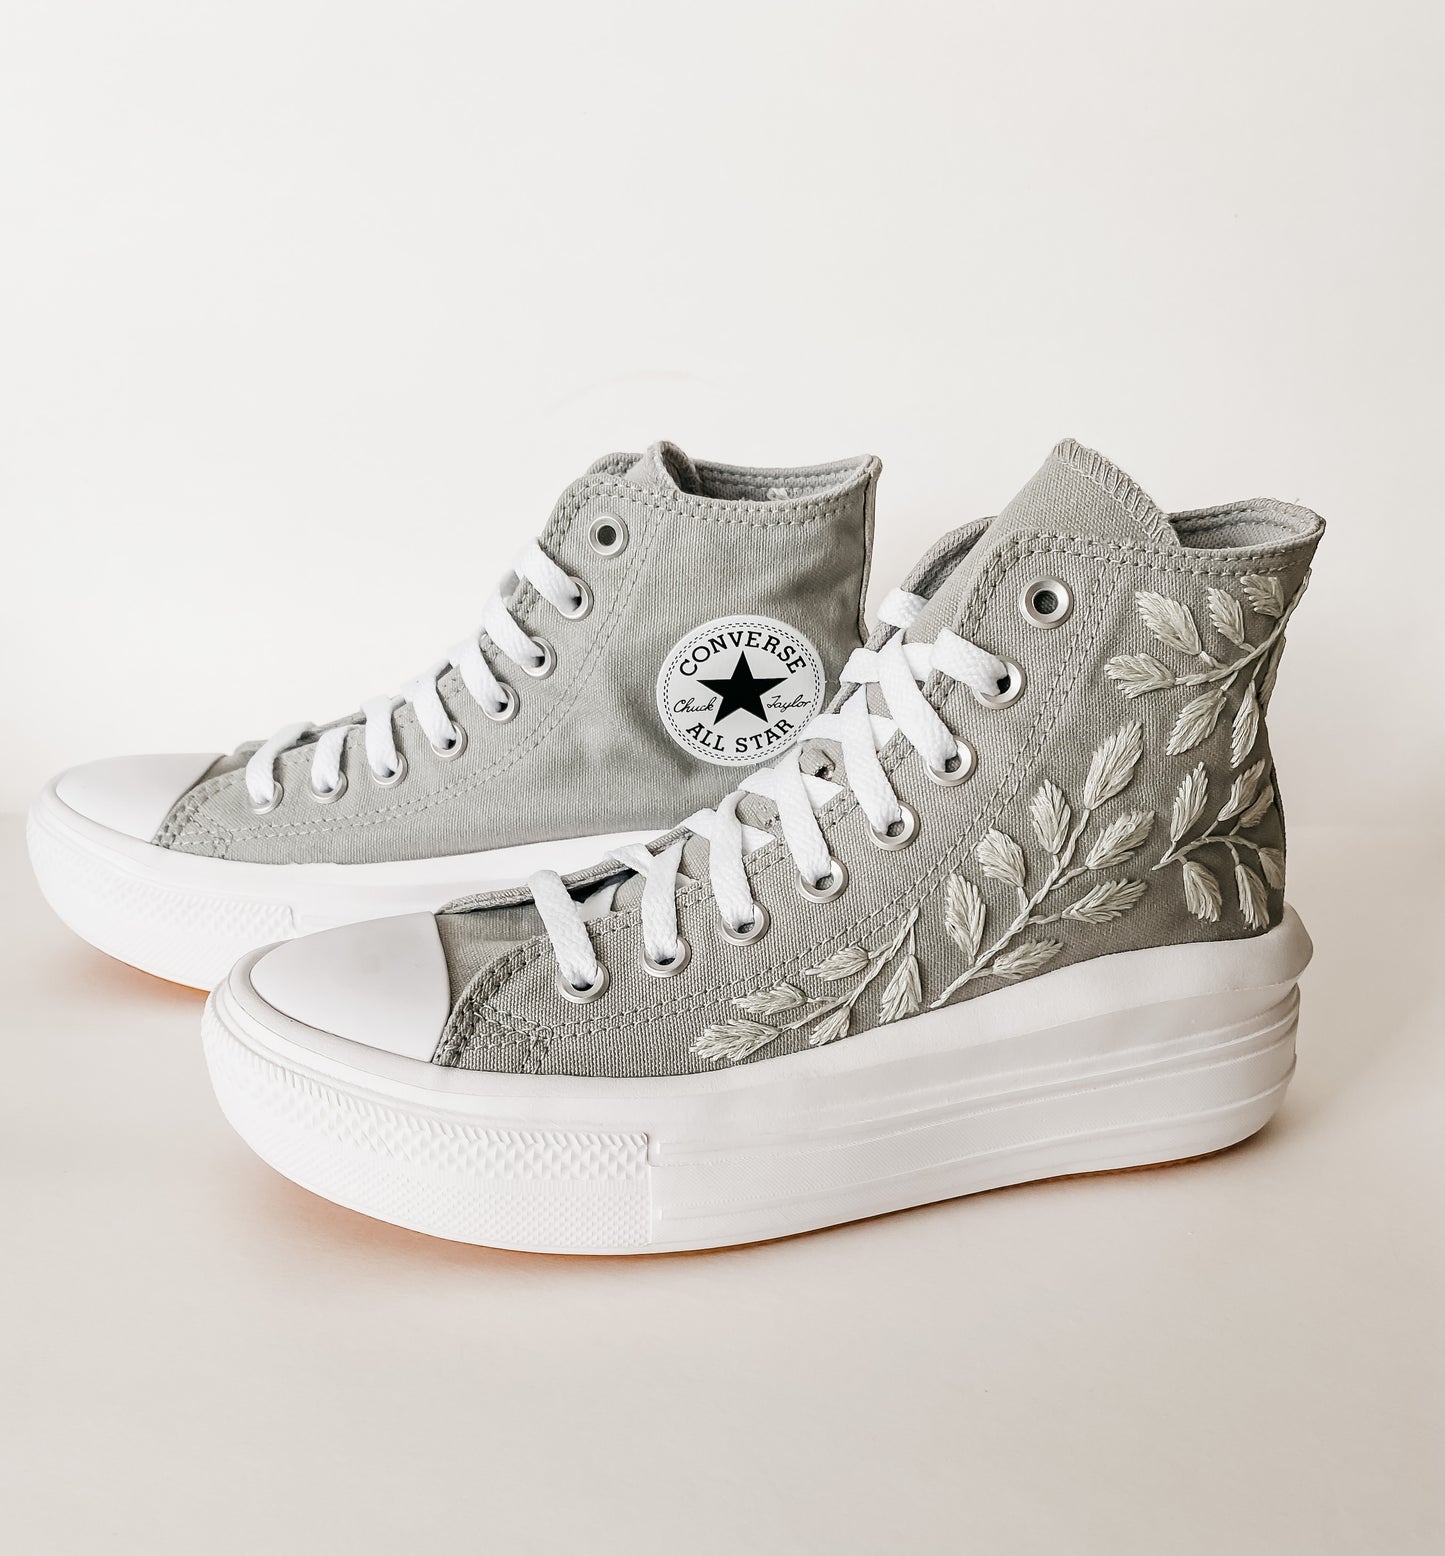 Leafy High Tops Converse PDF Embroidery Pattern